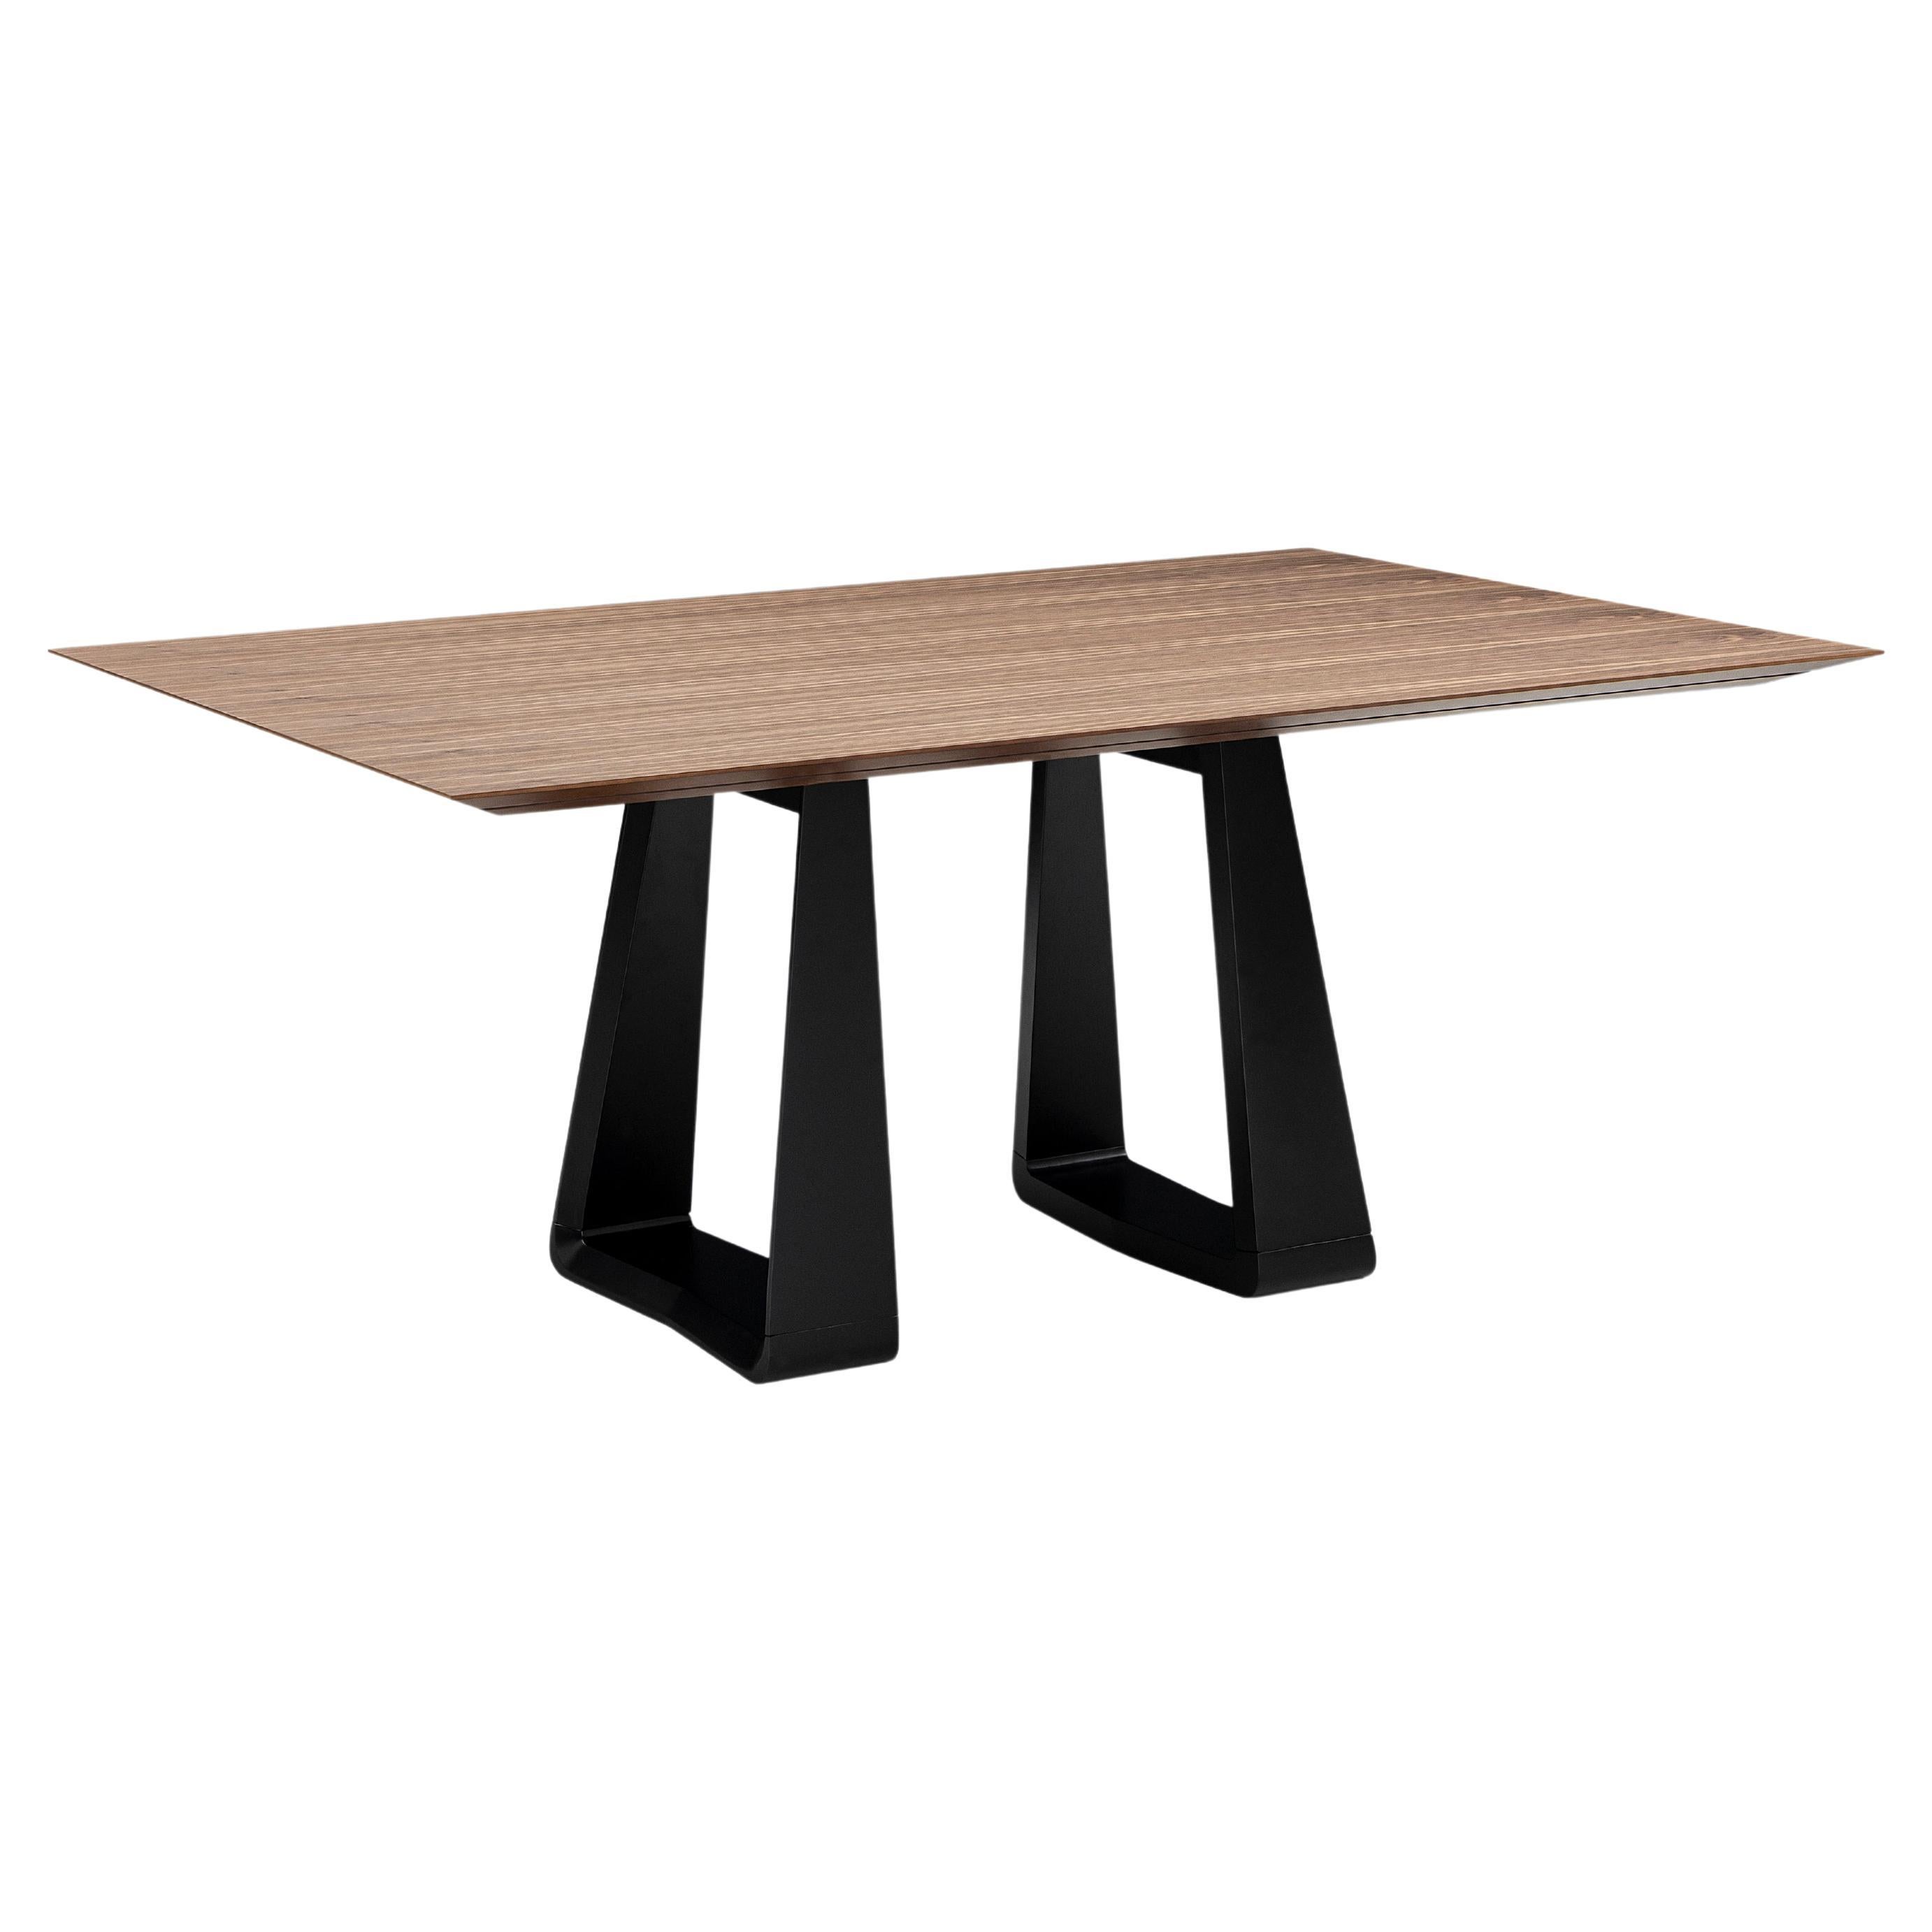 Wing Dining Table with a Walnut Wood Veneered Table Top and Black Base 67'' For Sale